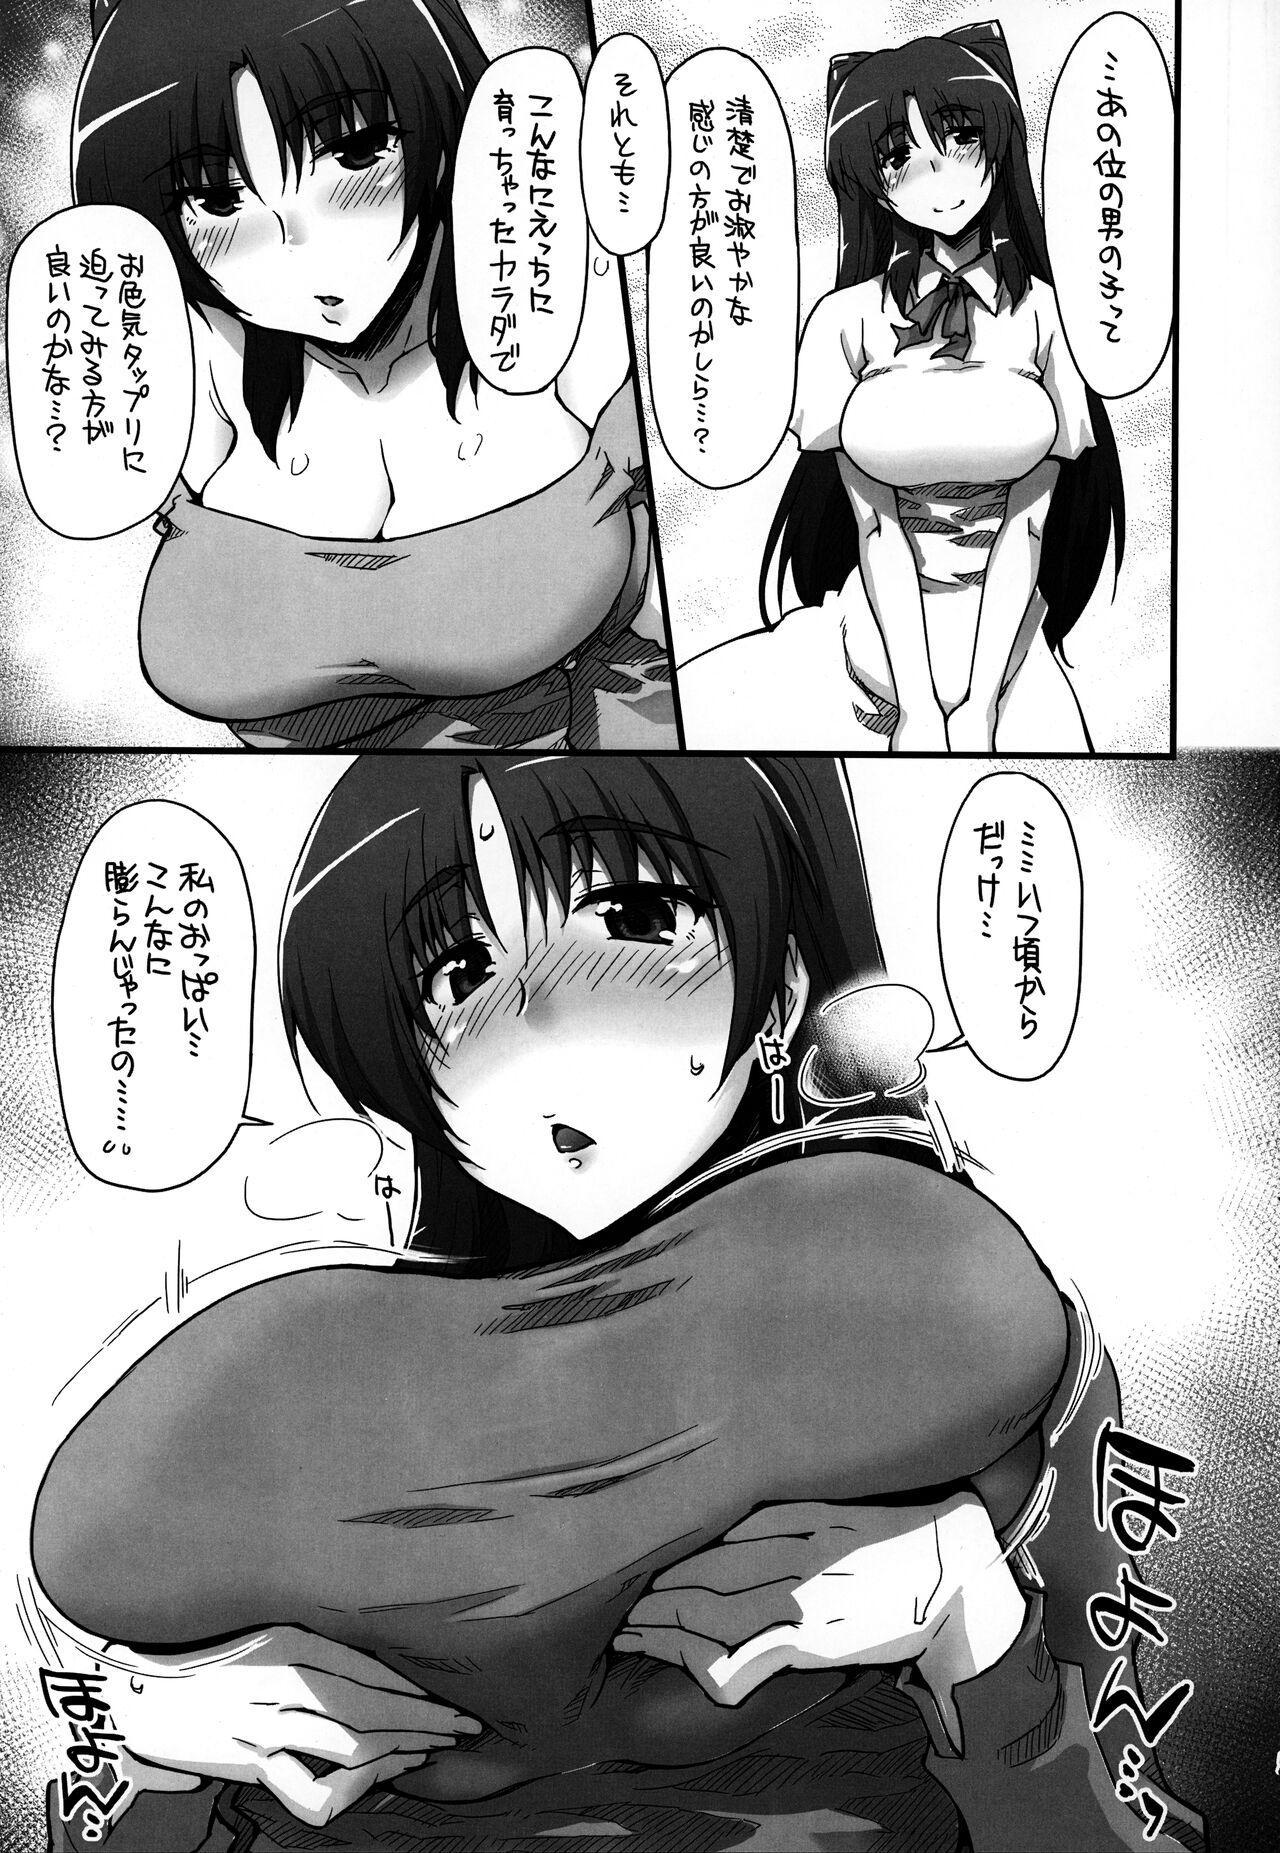 Hotfuck Complex-5. E.N.Complex! - The idolmaster Toheart2 Shaven - Page 4